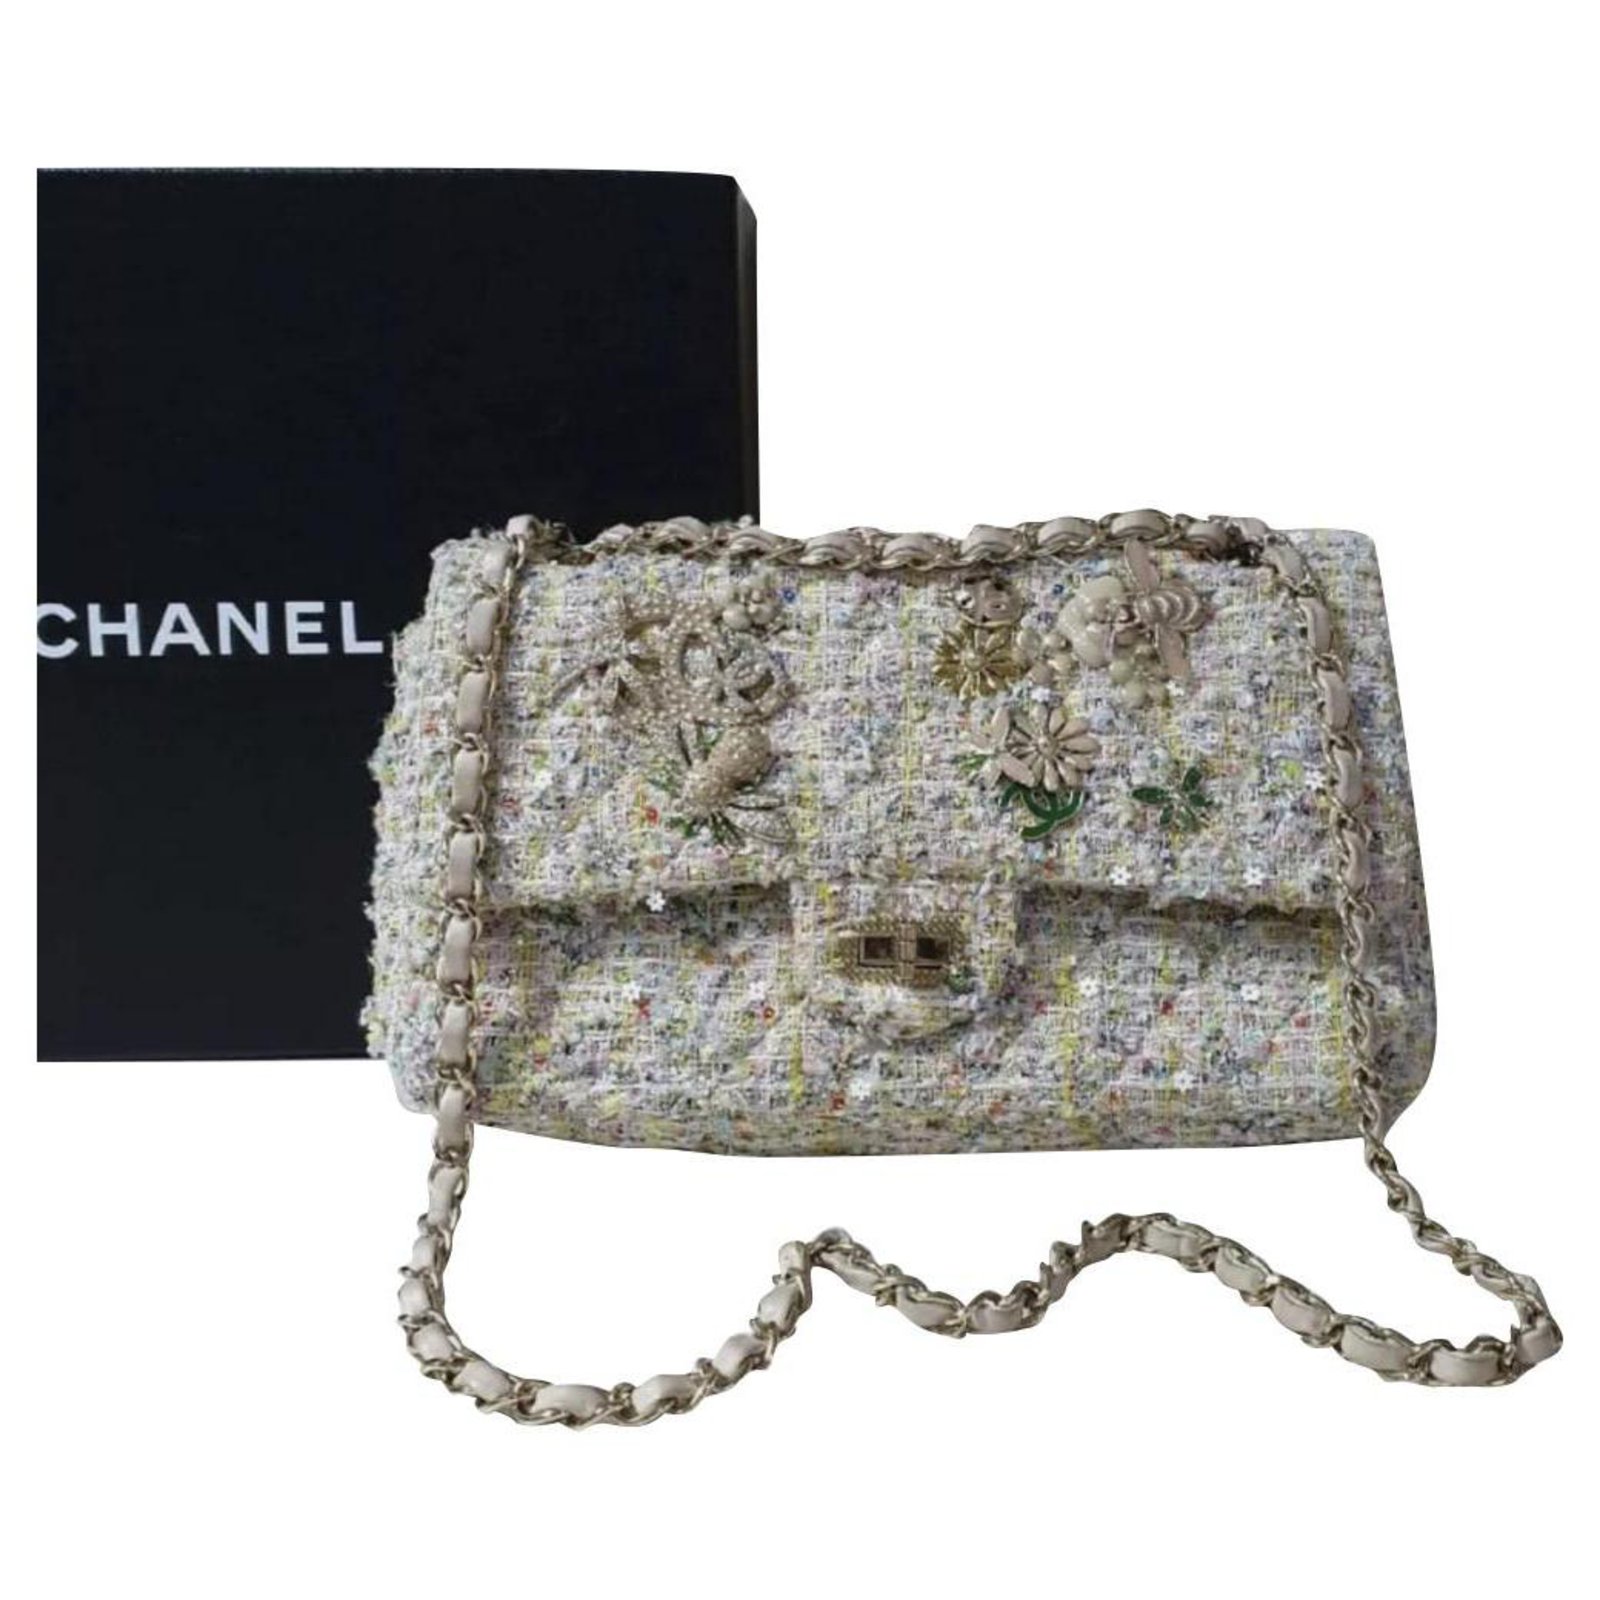 Chanel 2.55 Reissue Classic Flap Limited Garden Party 225 lined Tweed Bag